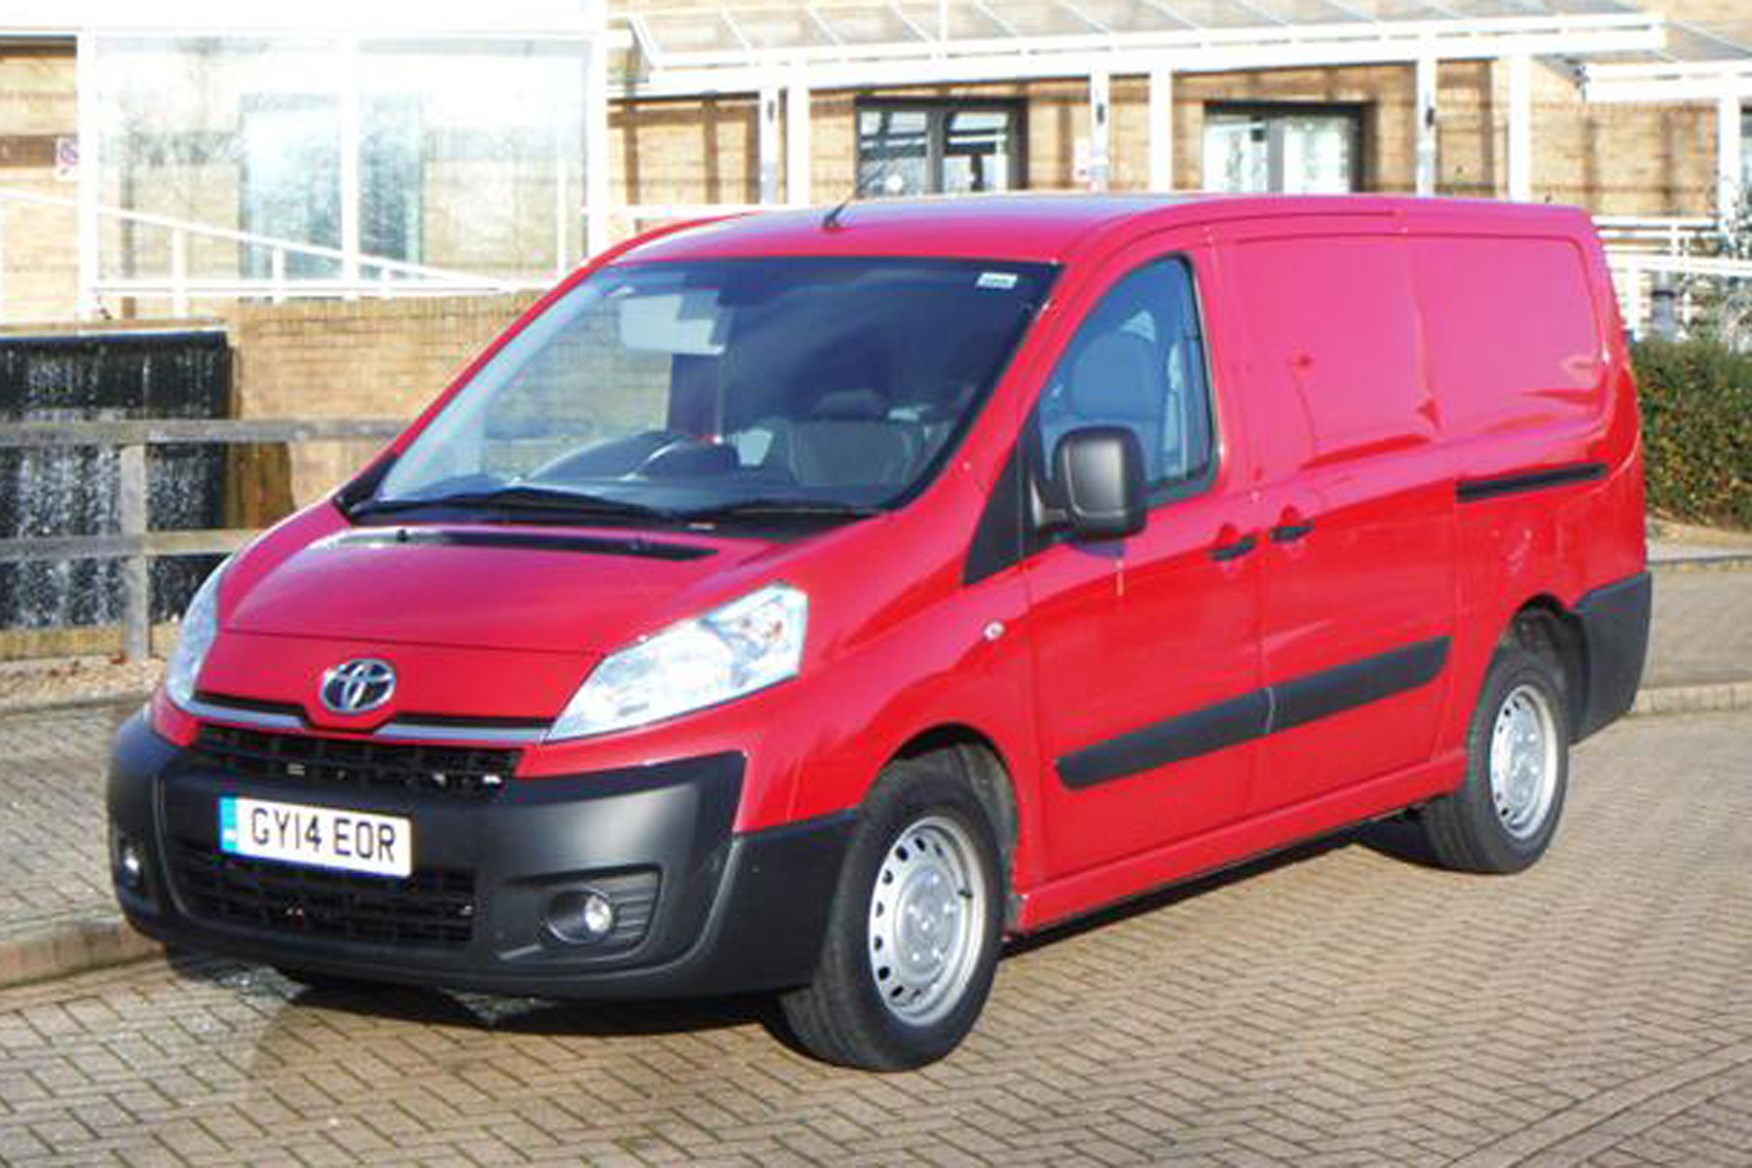 Toyota Proace review on Parkers Vans - exterior